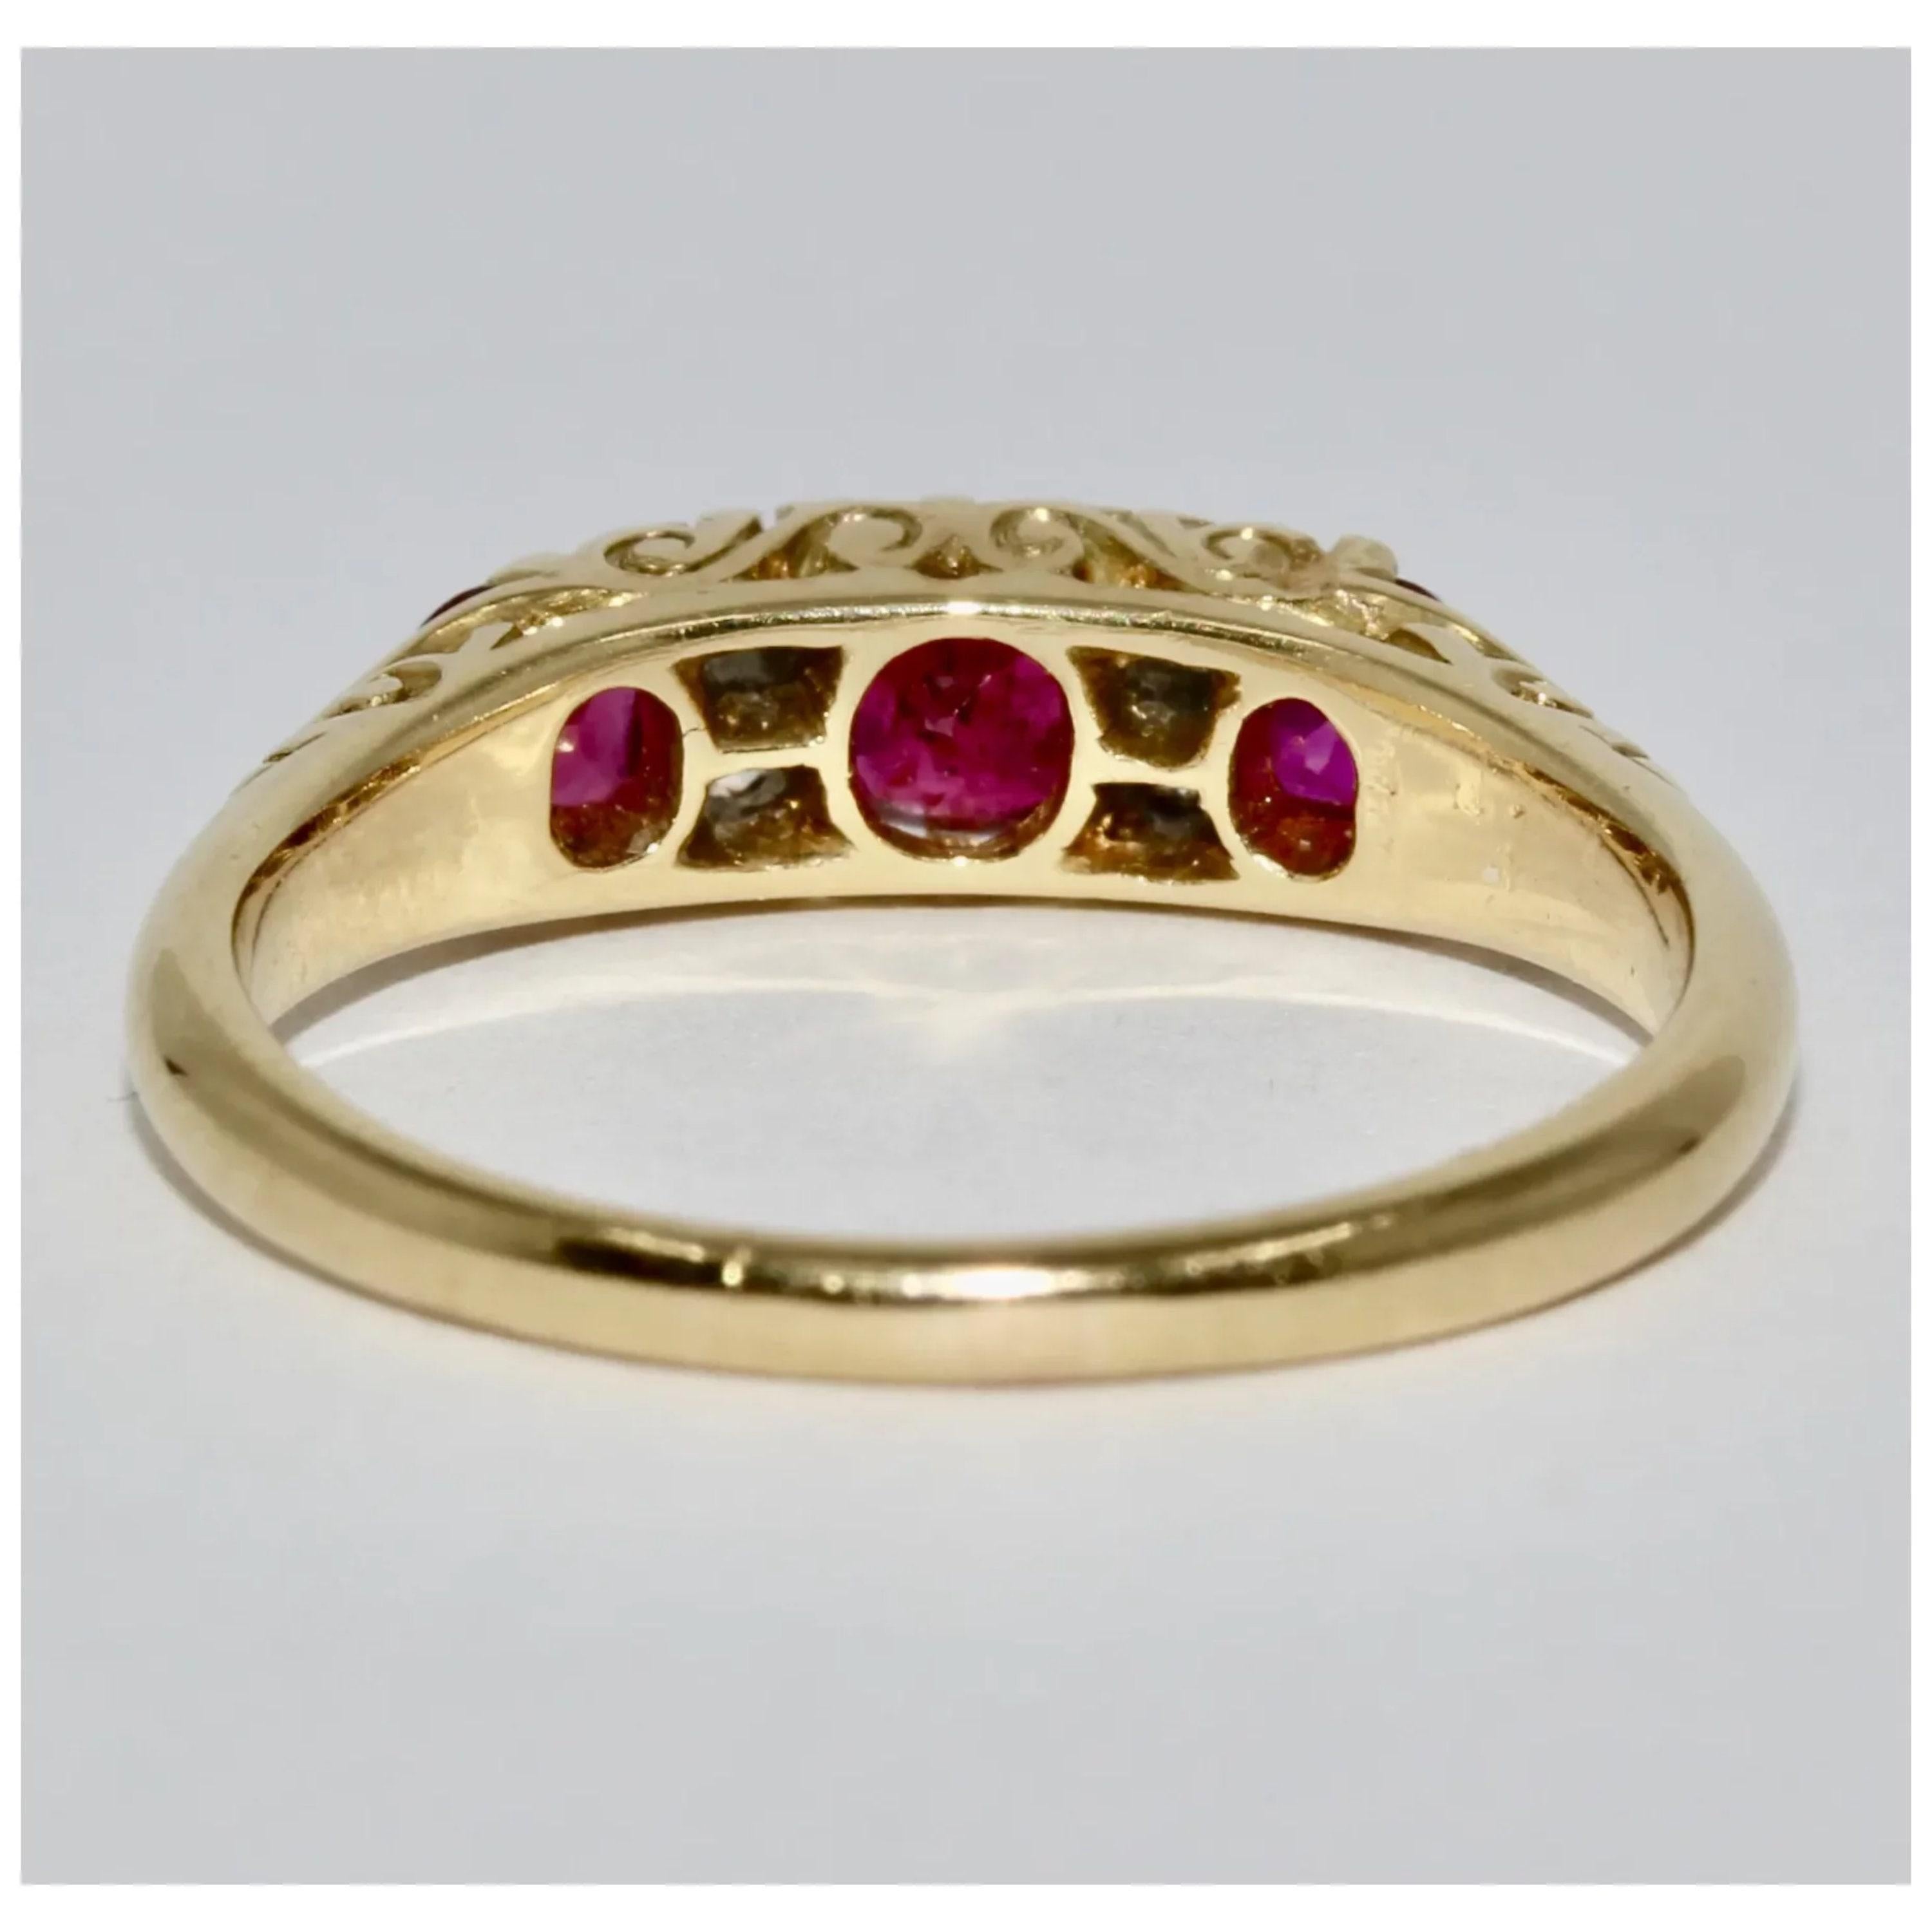 For Sale:  2 Carat Natural Ruby Diamond Engagement Ring Set in 18K Gold, Fashion Ring 3